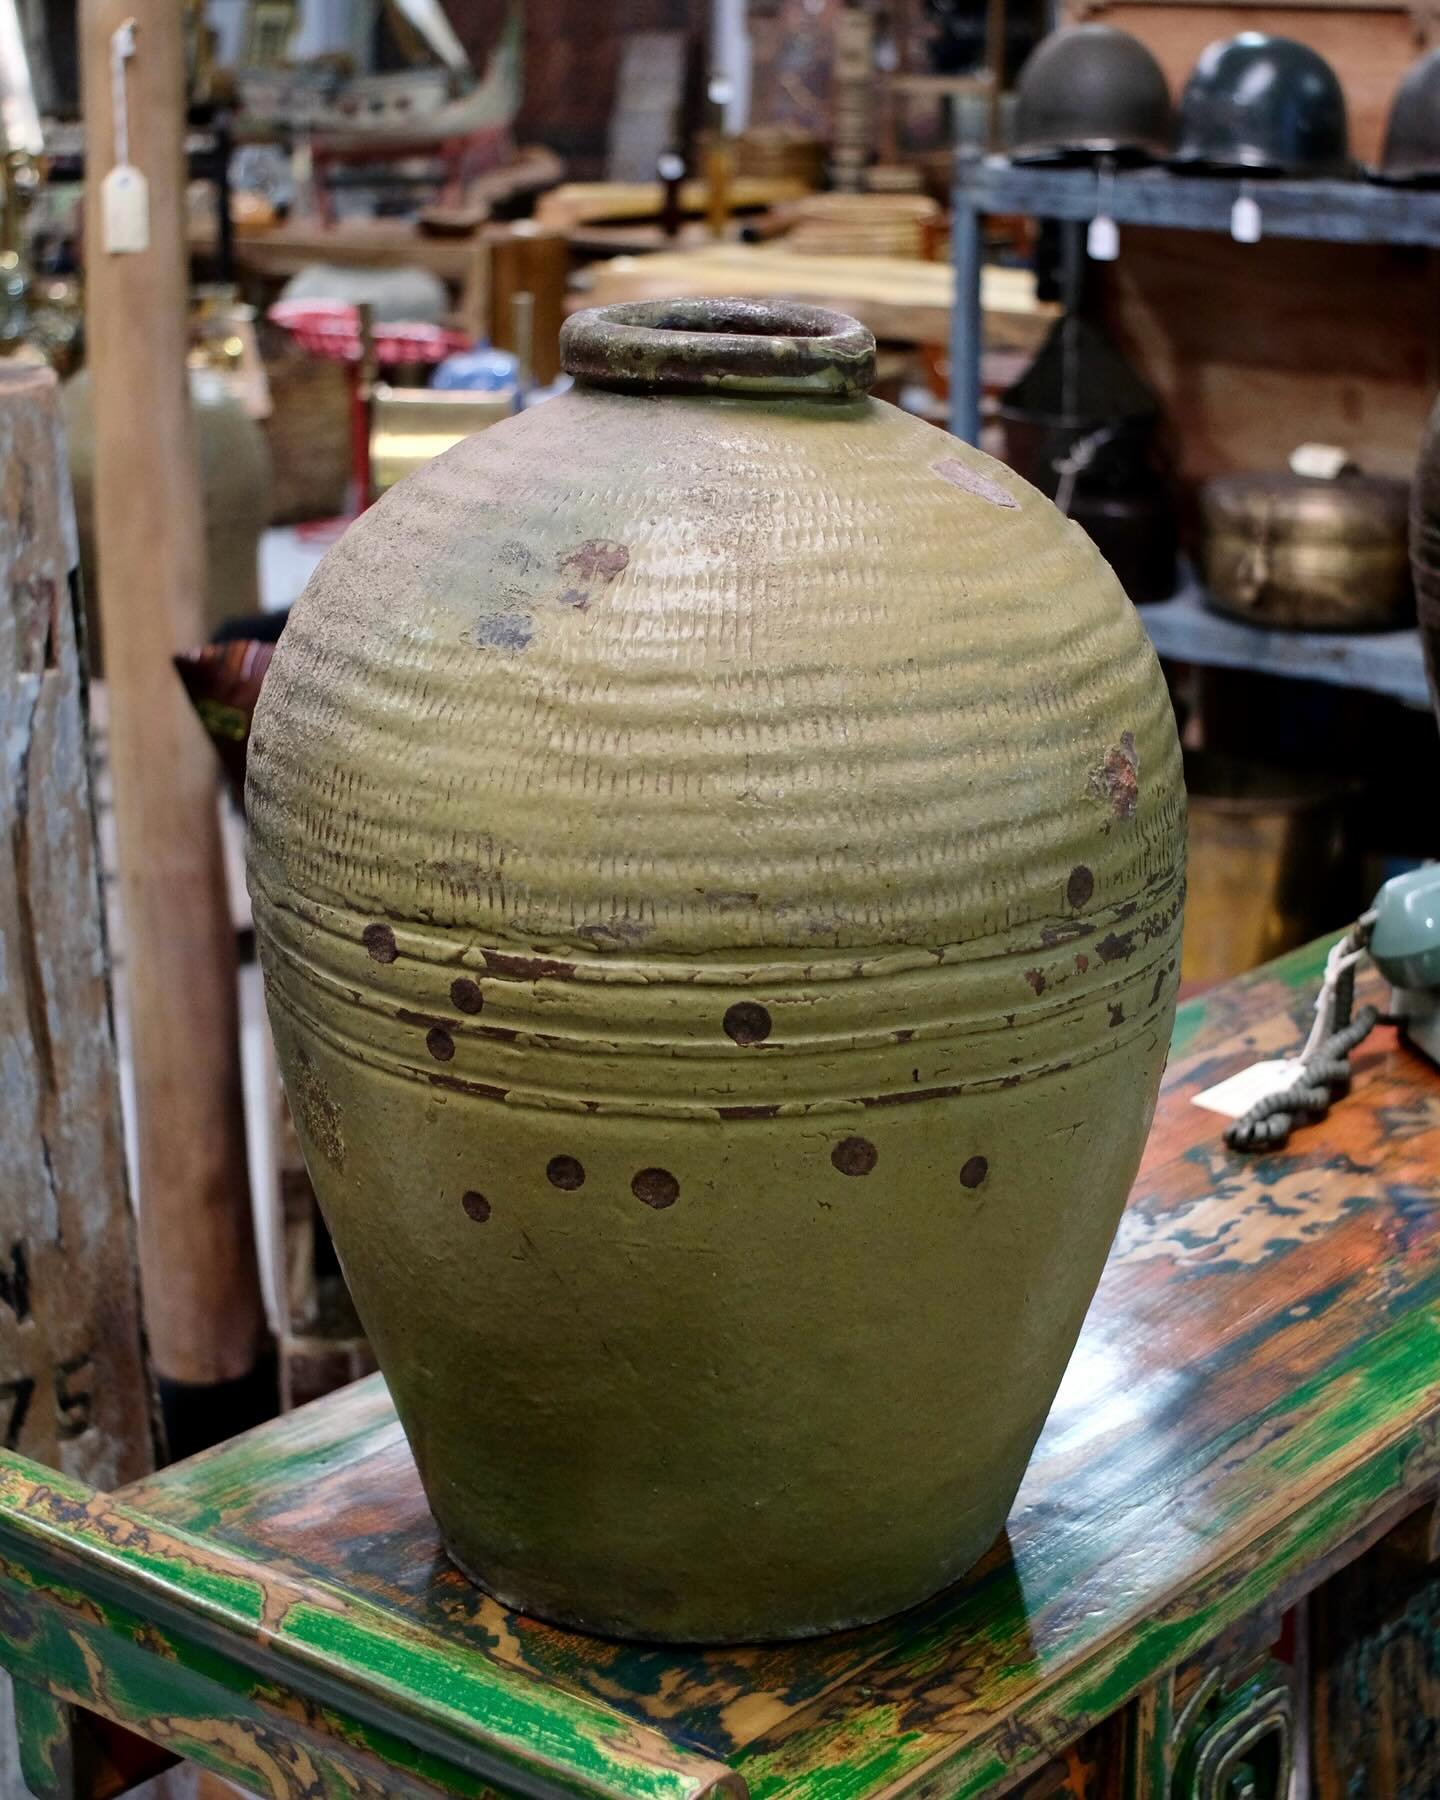 Vintage Bornean Fish Salting Pots

Just arrived and available from our Northern Rivers store. 
Open every weekend! 

Saturdays and Sundays 
9:30am - 1:00pm 
46 Red Lane, Rous 

bottomoftheharbour.com

#antique #antiques #vintage #pot #glaze #glassed 